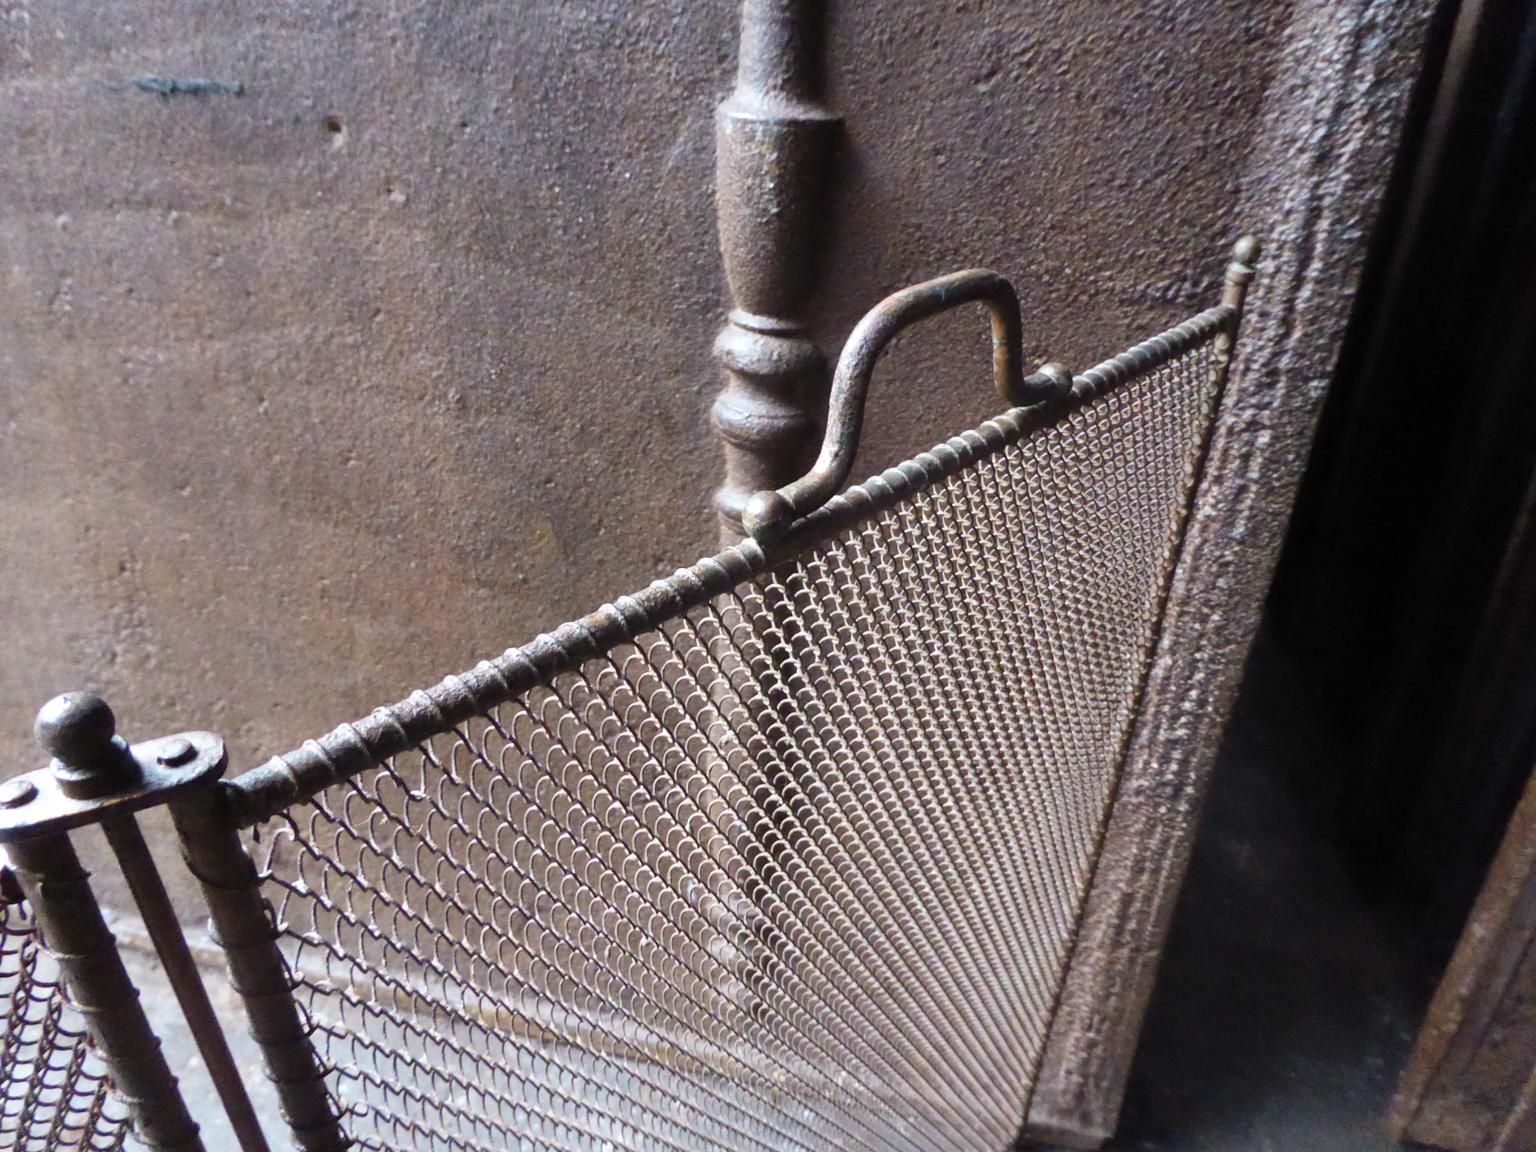 Antique French Napoleon III Fireplace Screen or Fire Screen, 19th Century 8